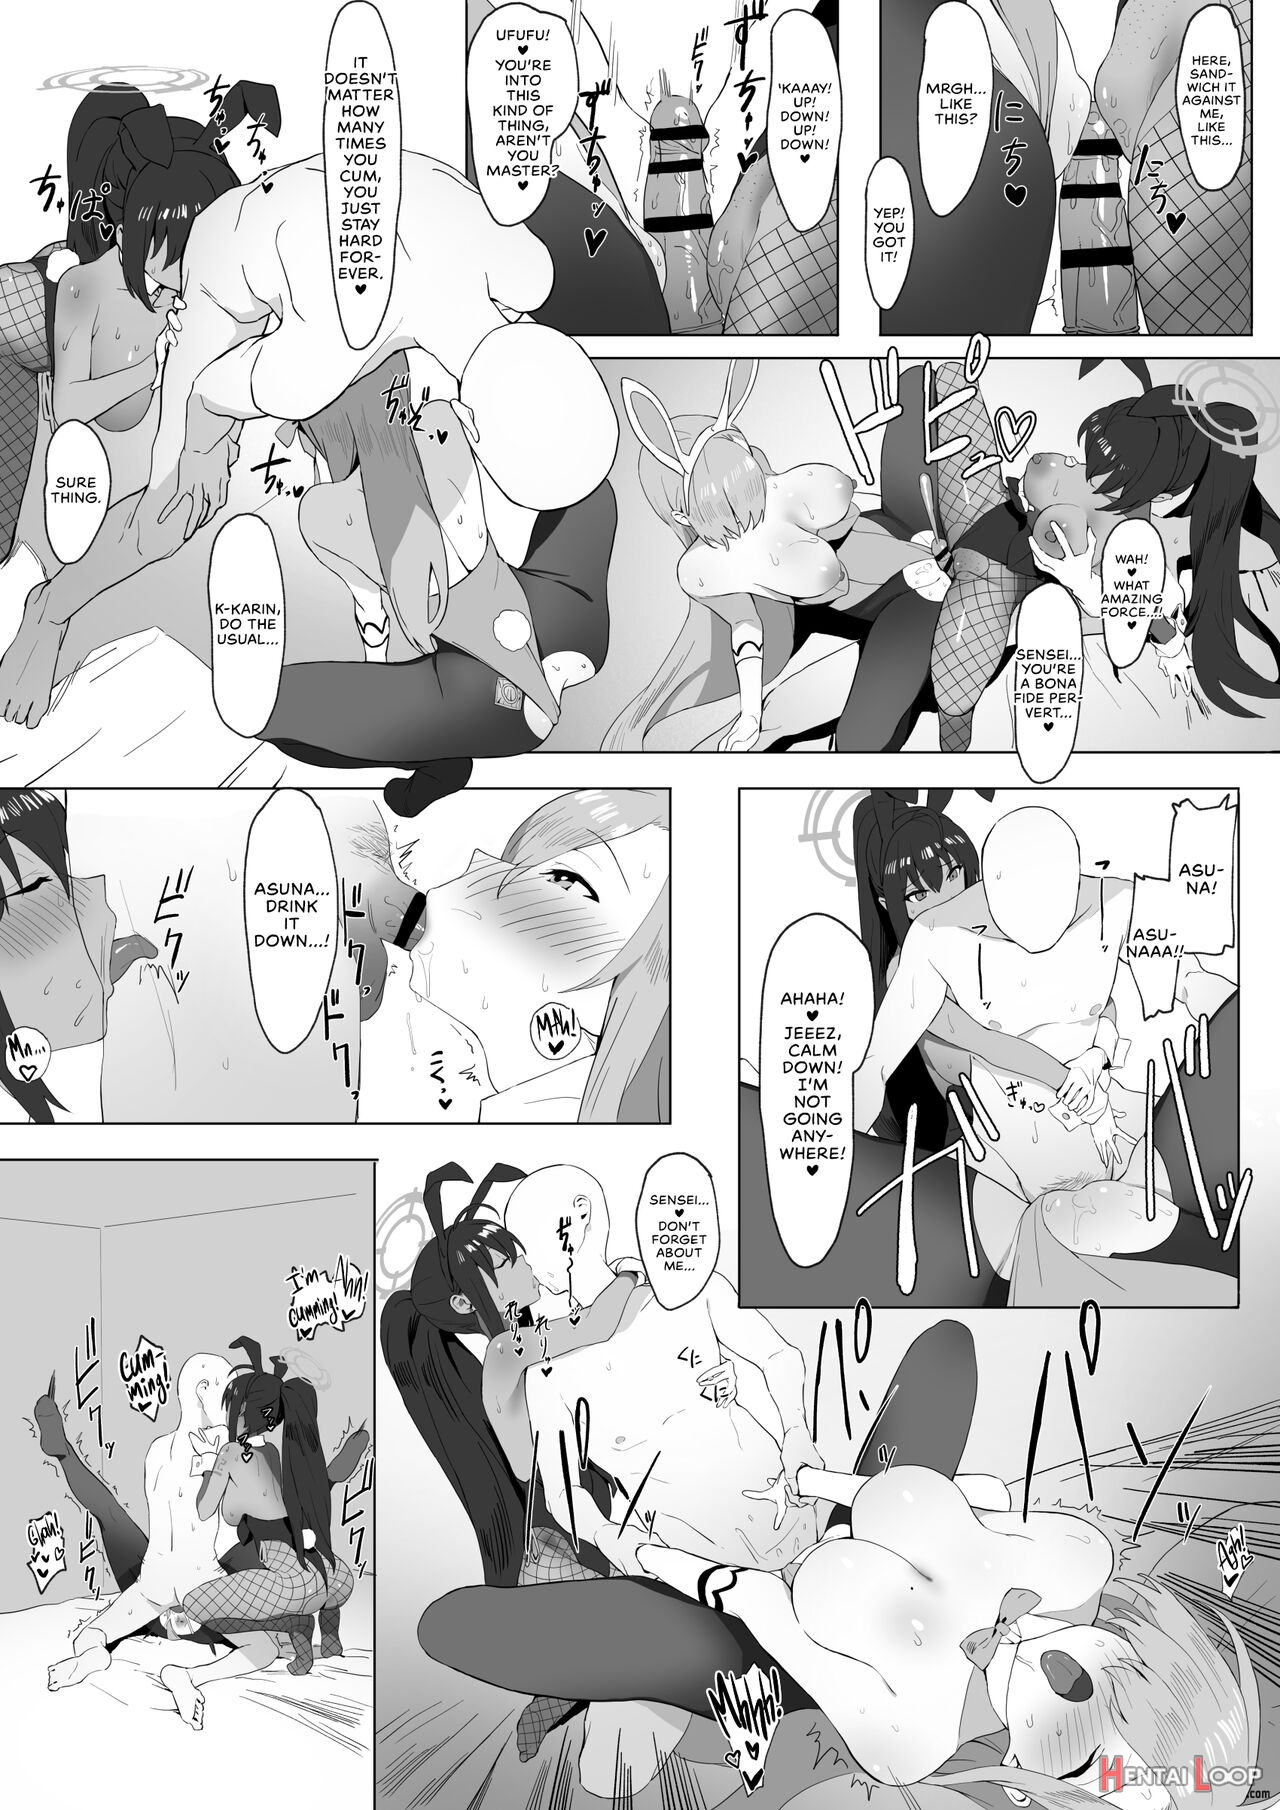 Asuna And Karin, At Your Service! page 10